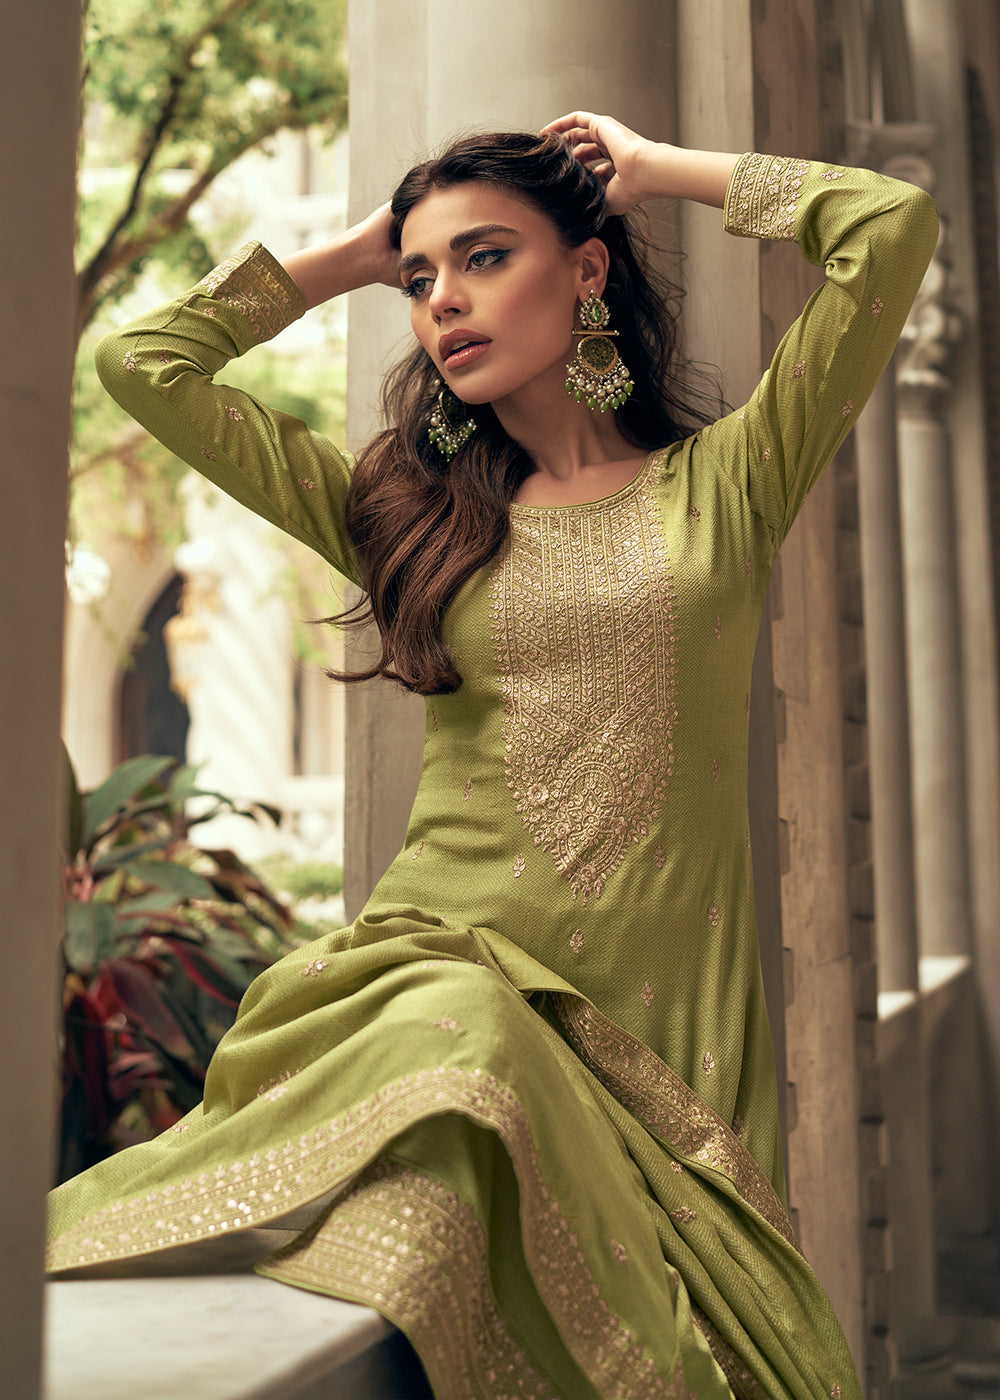 Buy Now Art Silk Stunning Green Embroidered Festive Palazzo Suit Online in USA, UK, Canada, Germany, Australia & Worldwide at Empress Clothing.